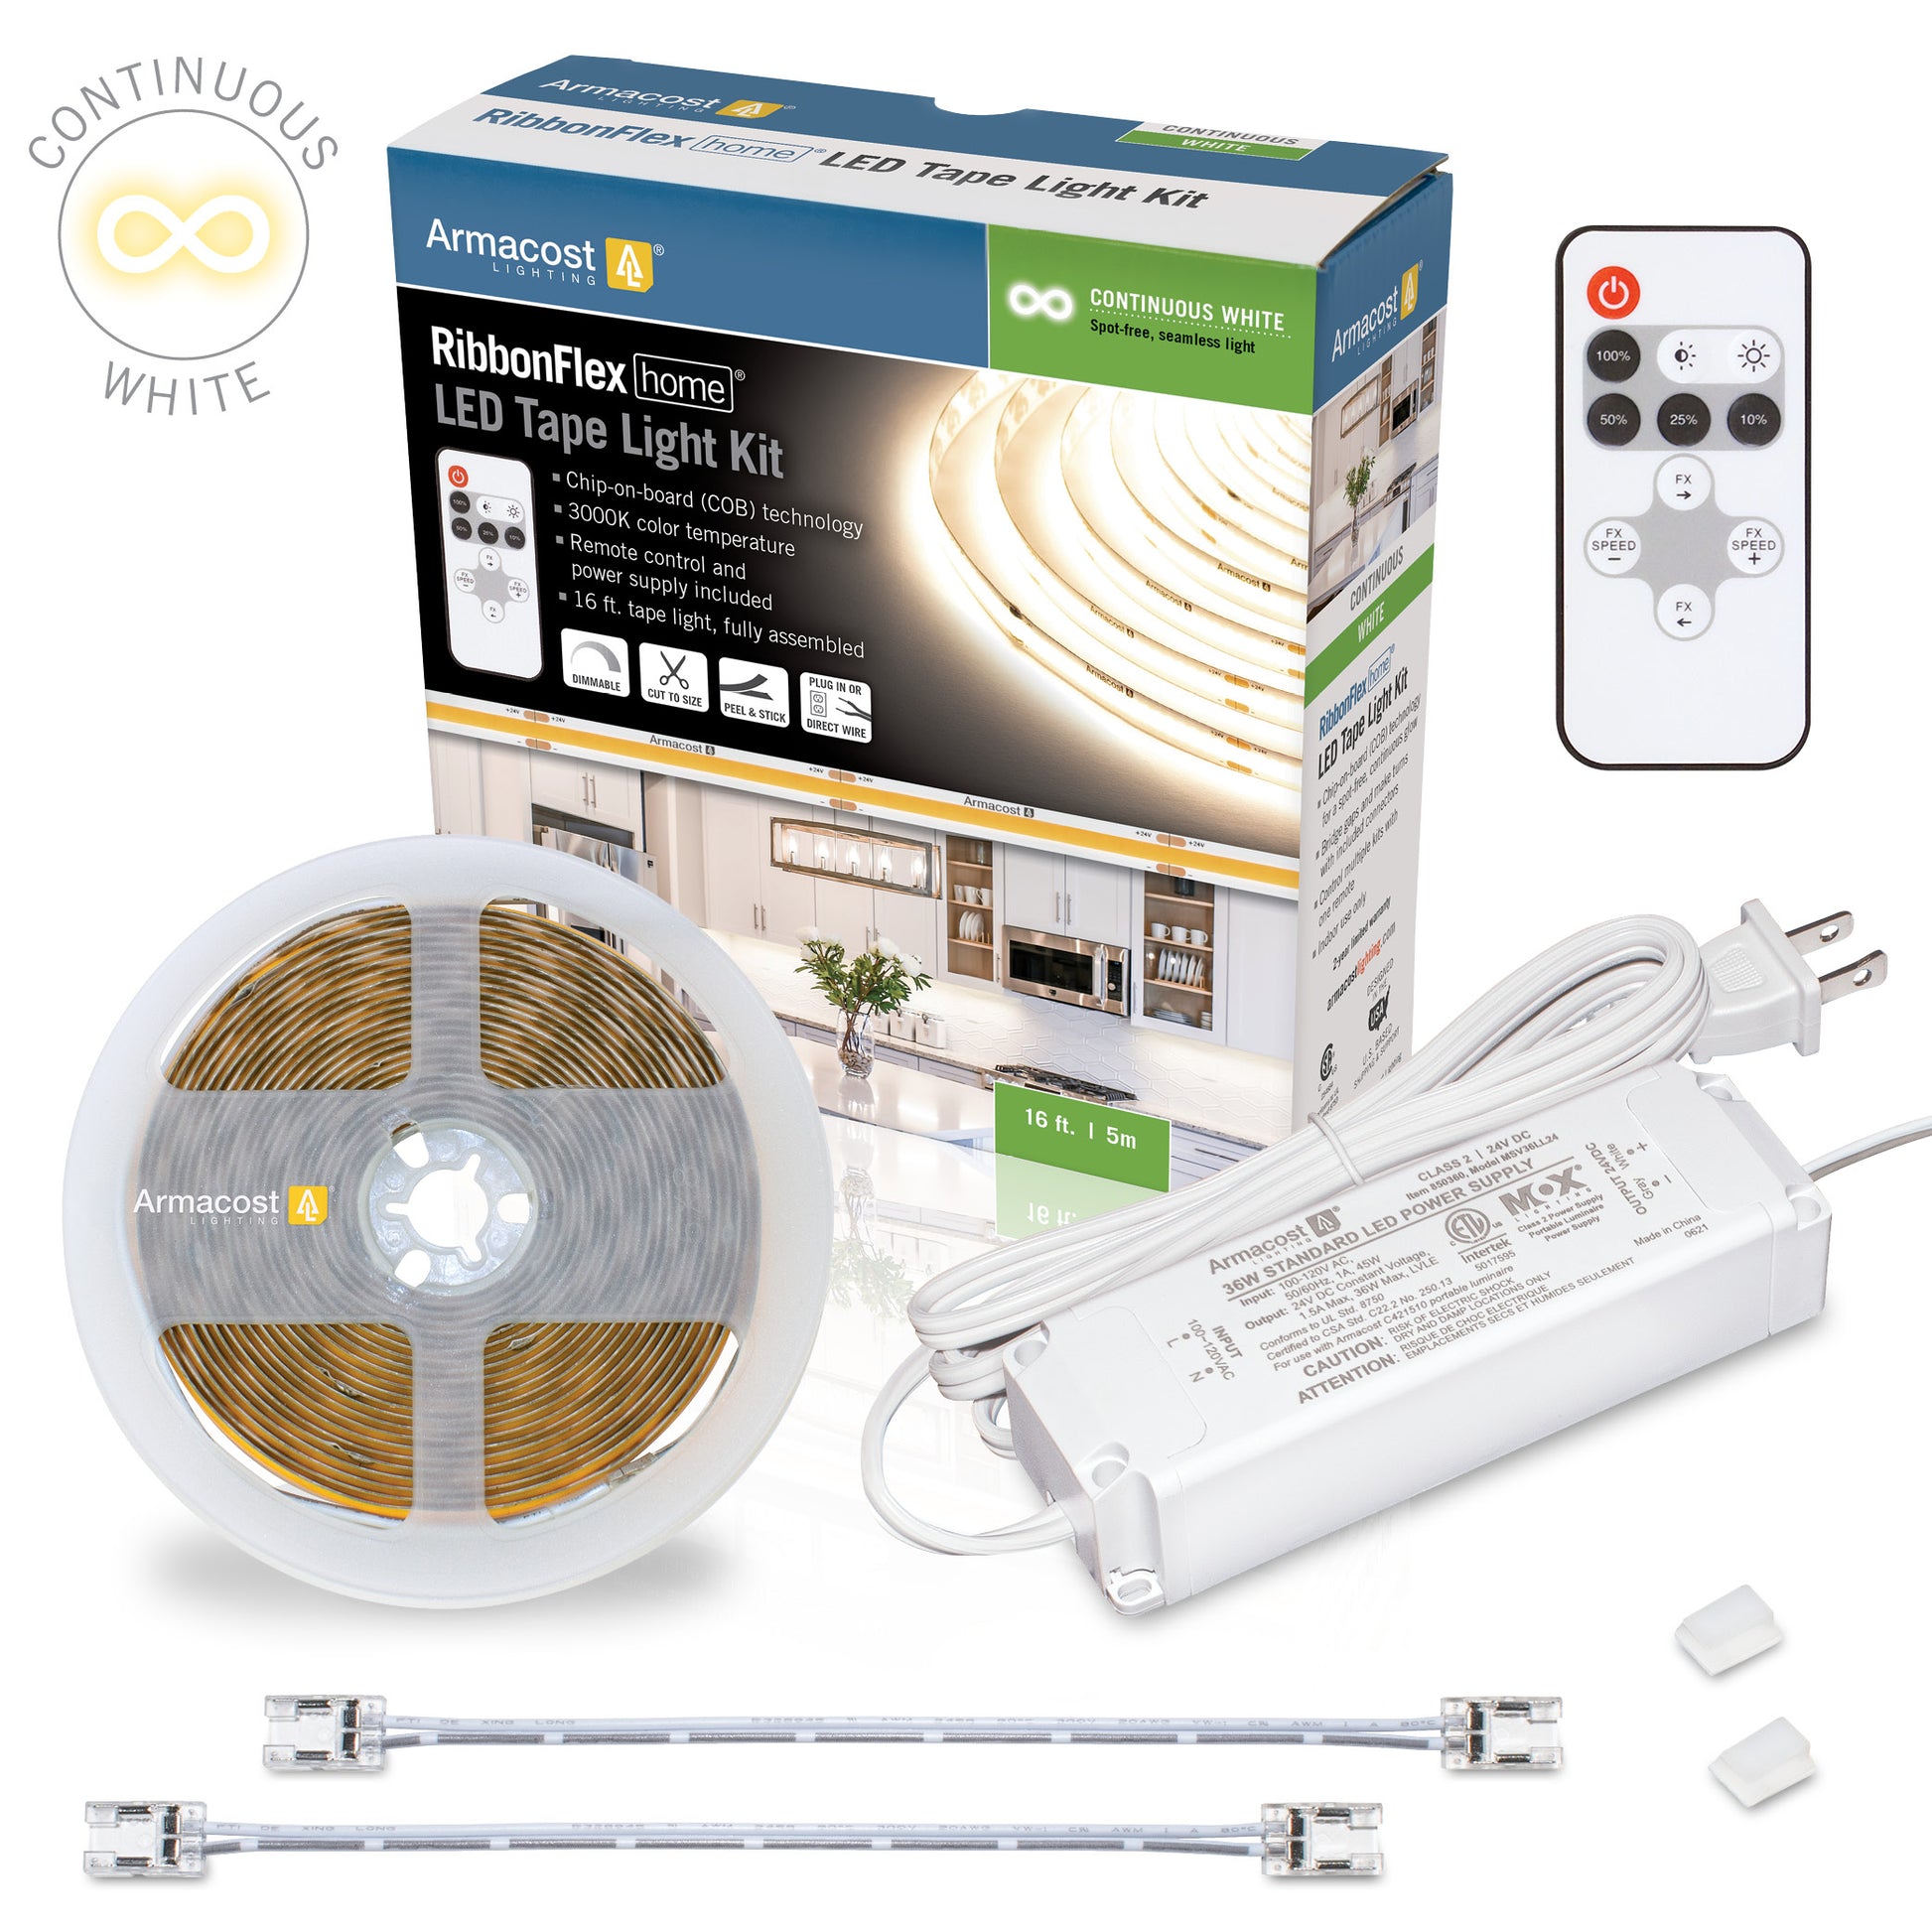 24V Continuous LED Strip Light Kit – Armacost Lighting